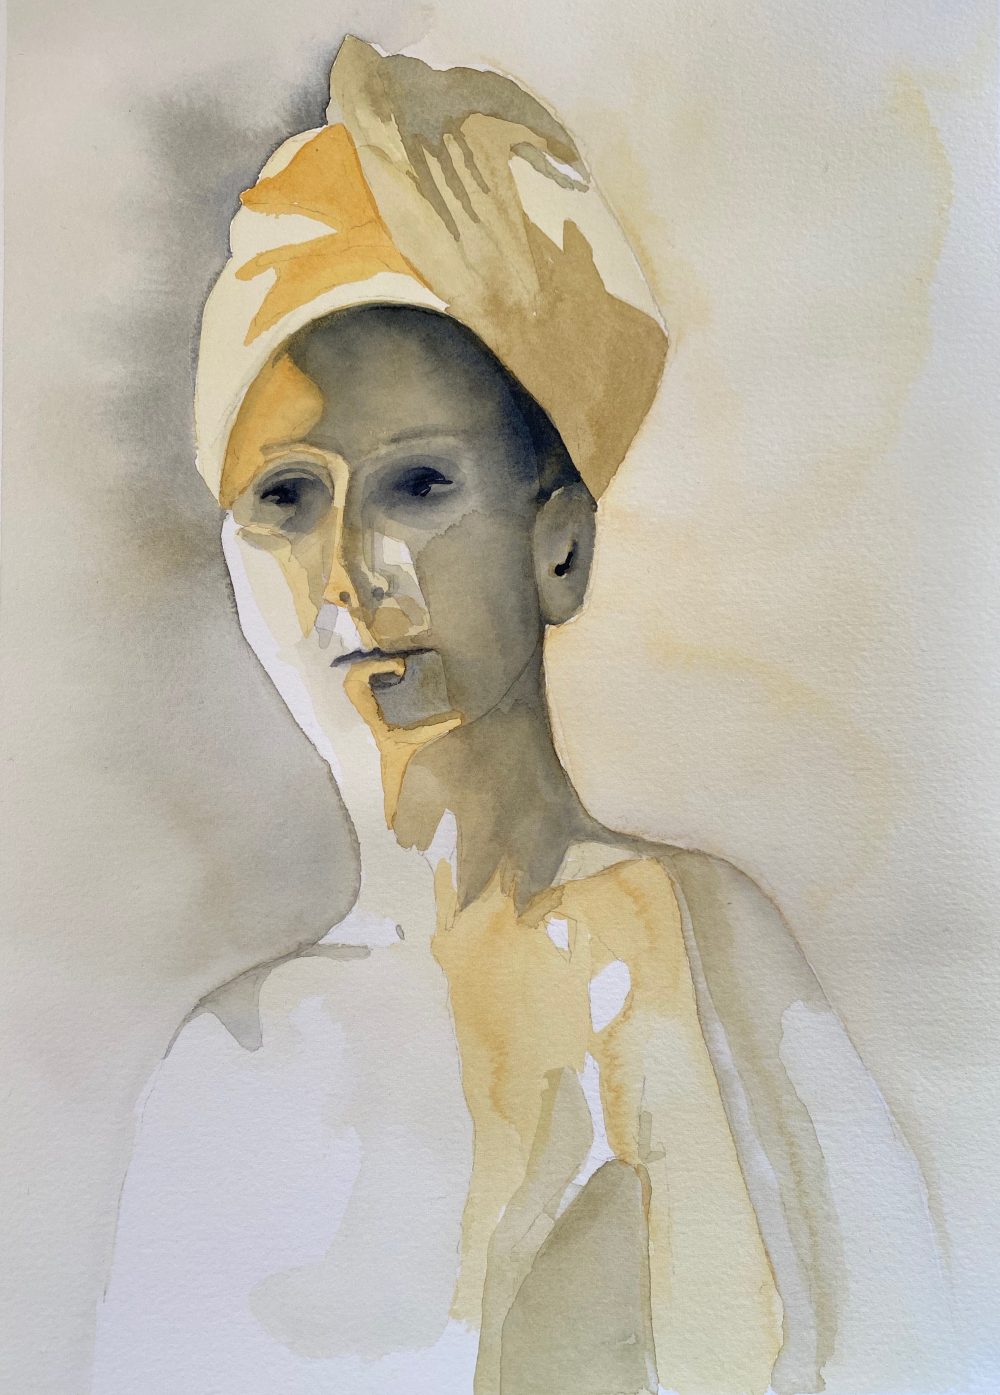 A yellow and gray portrait of a woman recovering from cancer.